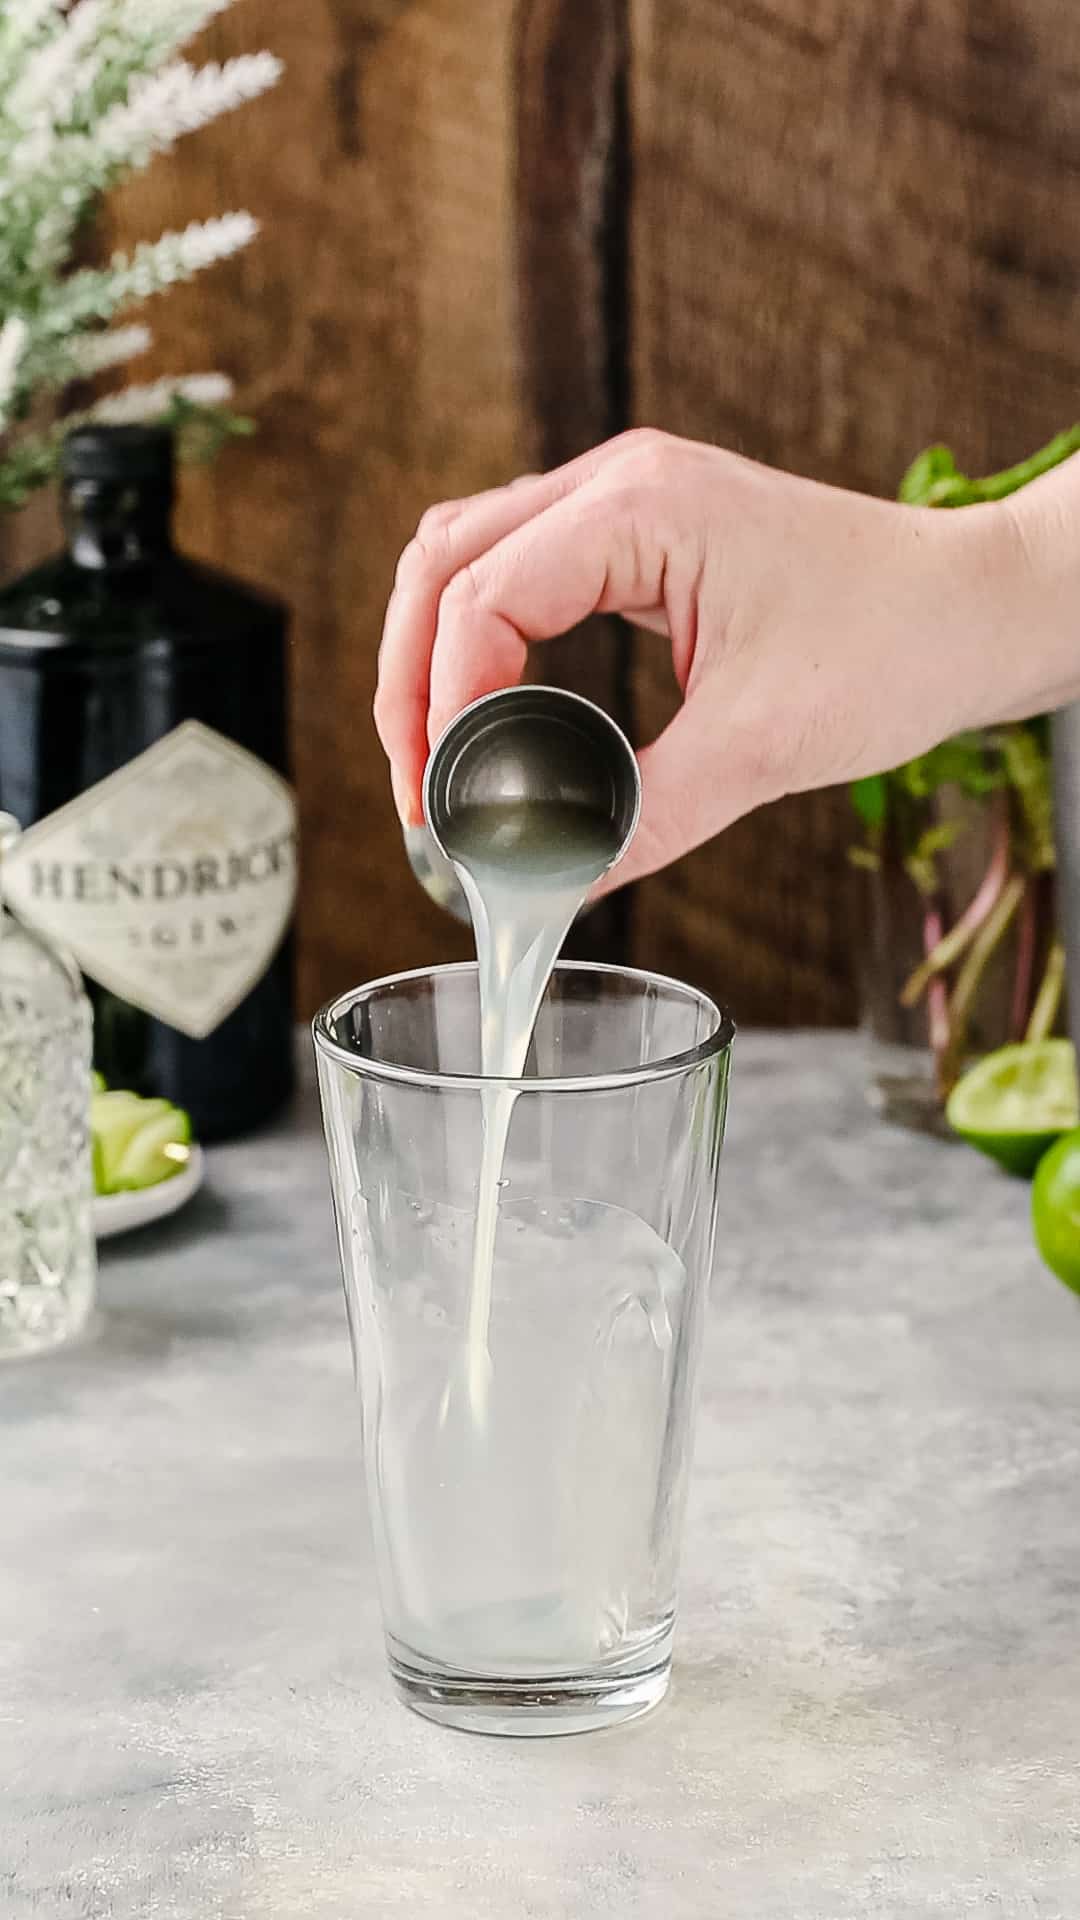 Hand adding lime juice to a cocktail shaker using a jigger.